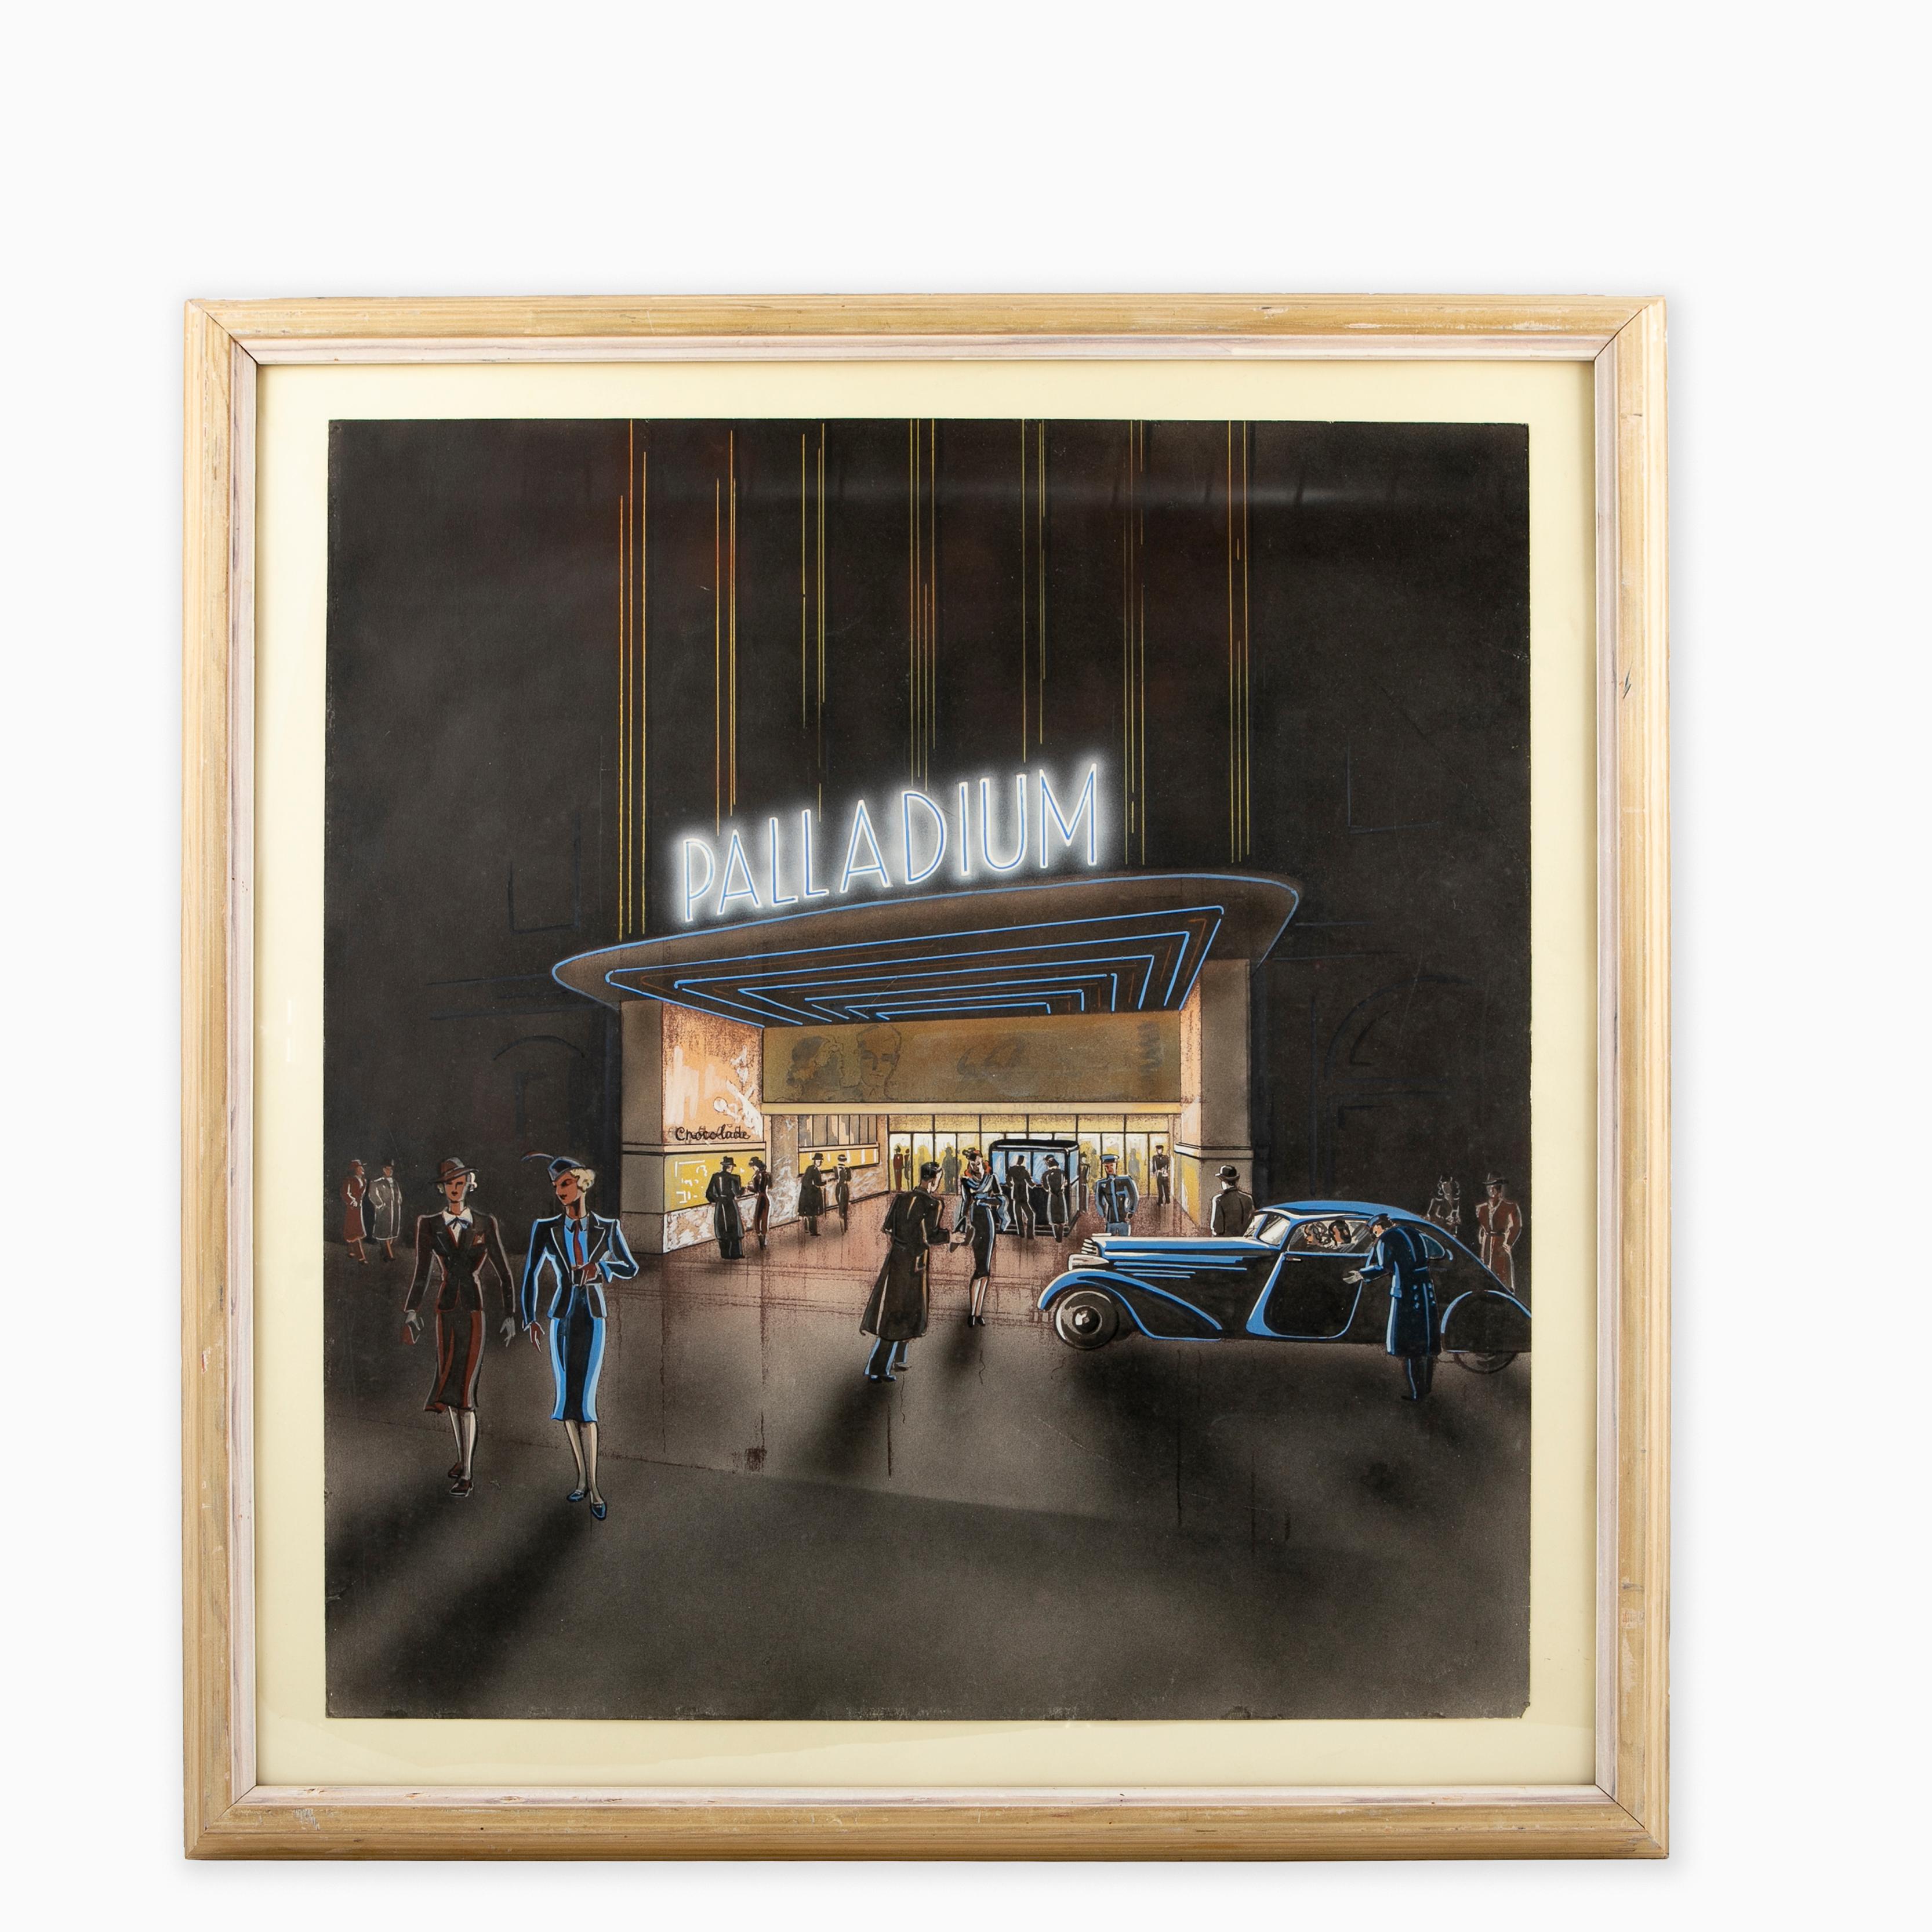 Rare original art deco poster by Svend Koppel depicting the 'Palladium Cinema' in Copenhagen Denmark.
Airbrush on paper, 1938.
 Measures: Frame: 61 x 55,5 x 3 cm

Reproductions of the original poster was made and sold after the poster was found